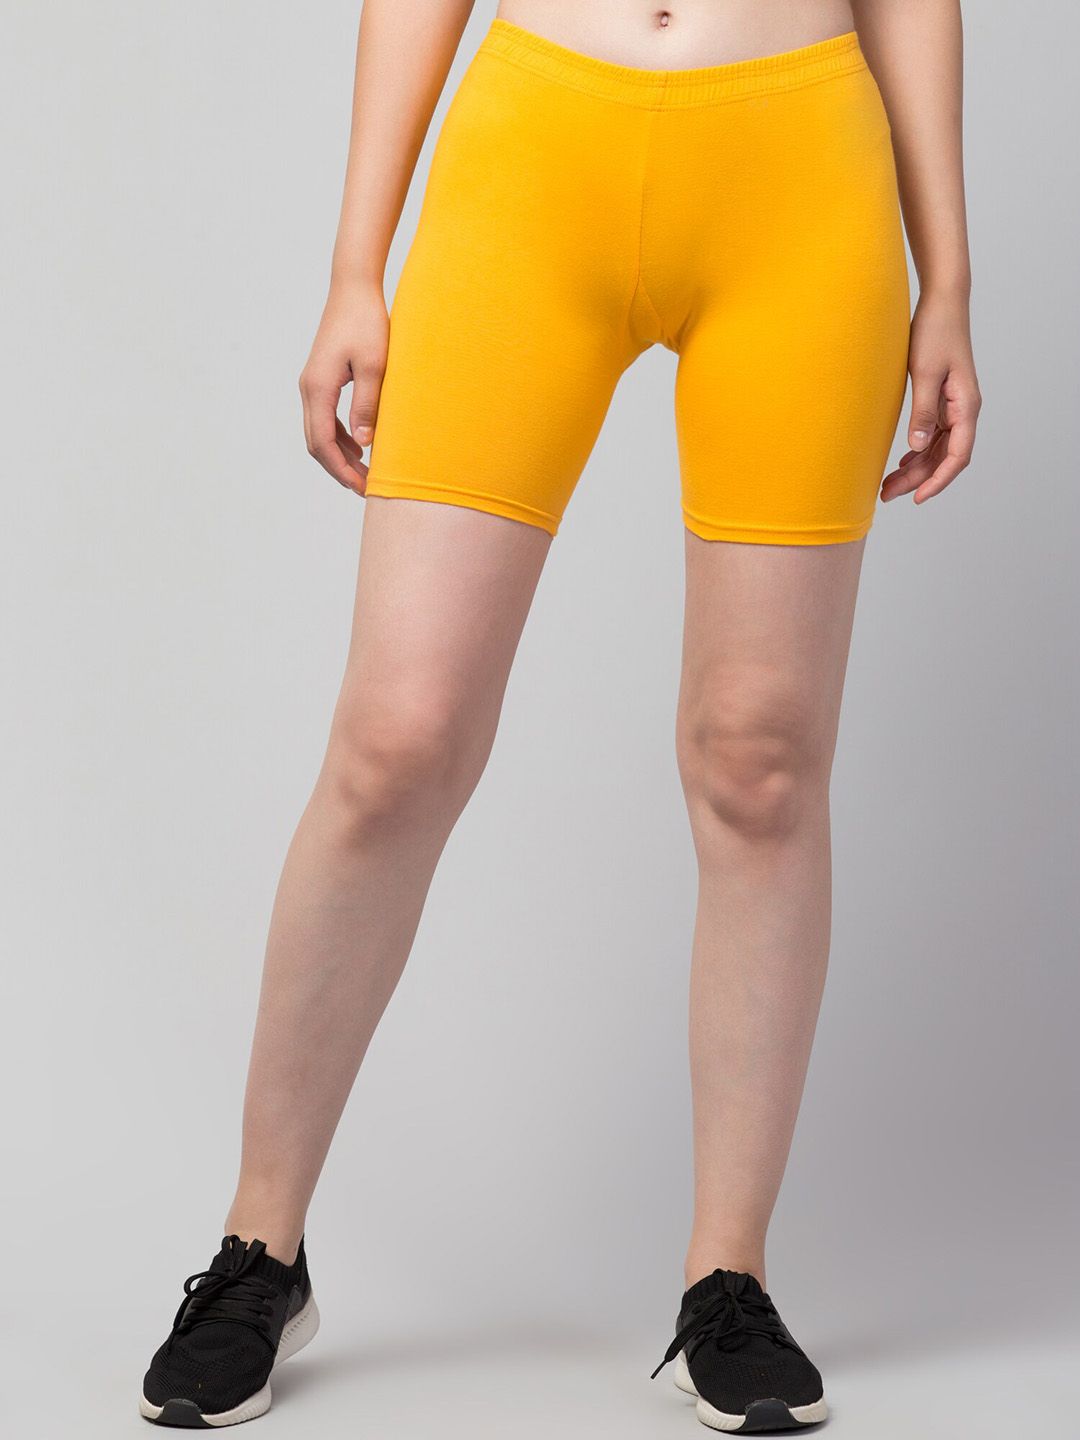 Apraa & Parma Women Slim Fit Pure Cotton Cycling Sports Shorts Price in India